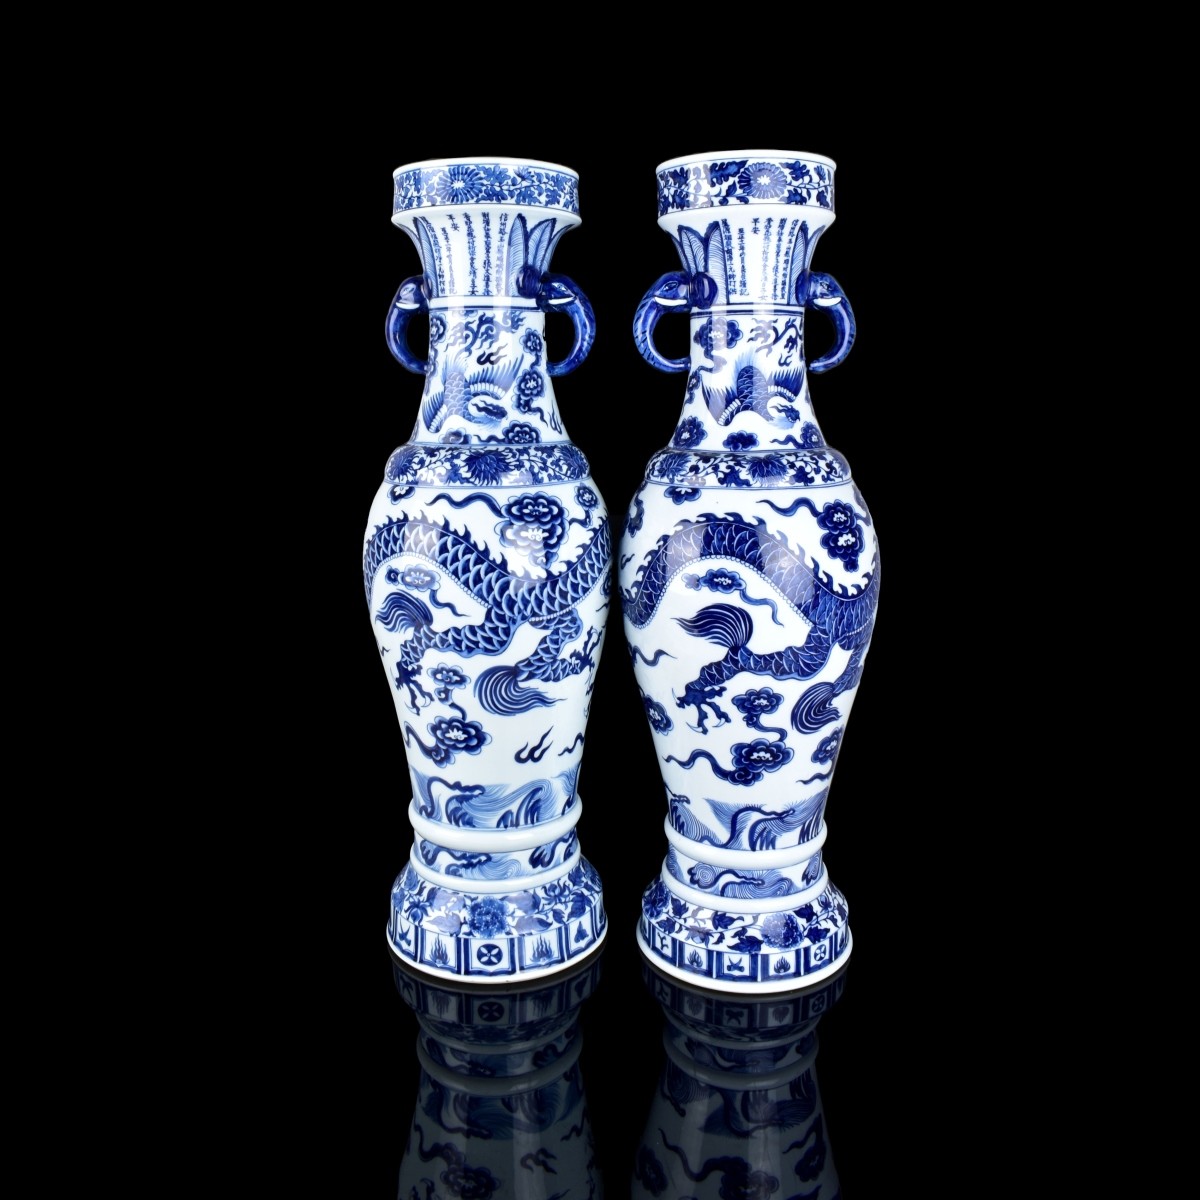 Two Large Chinese Porcelain Vases